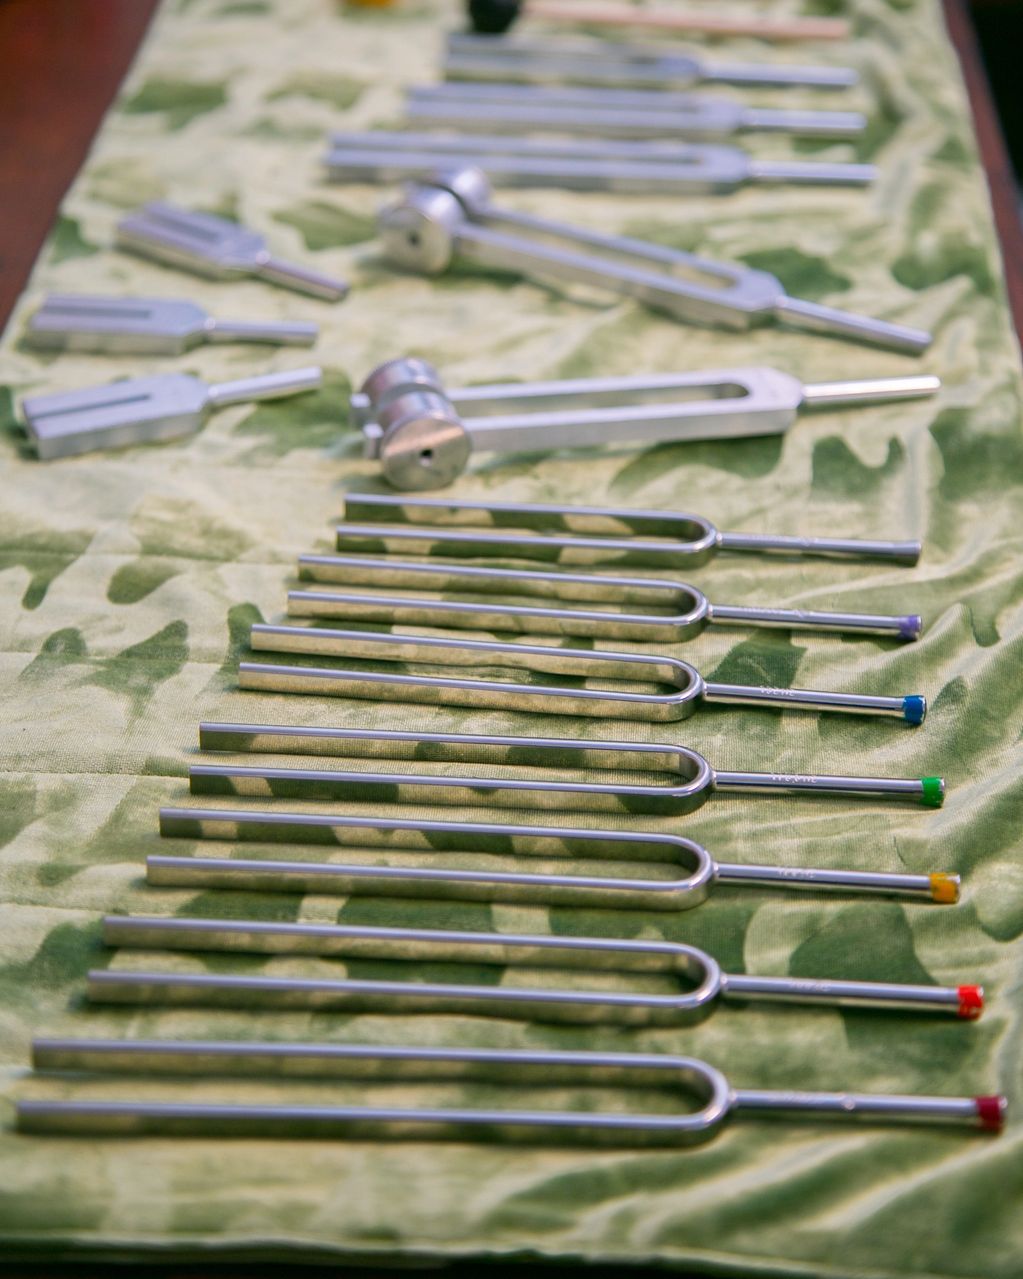 Tuning forks allow sound to help with the healing process. All energy is vibrational energy.